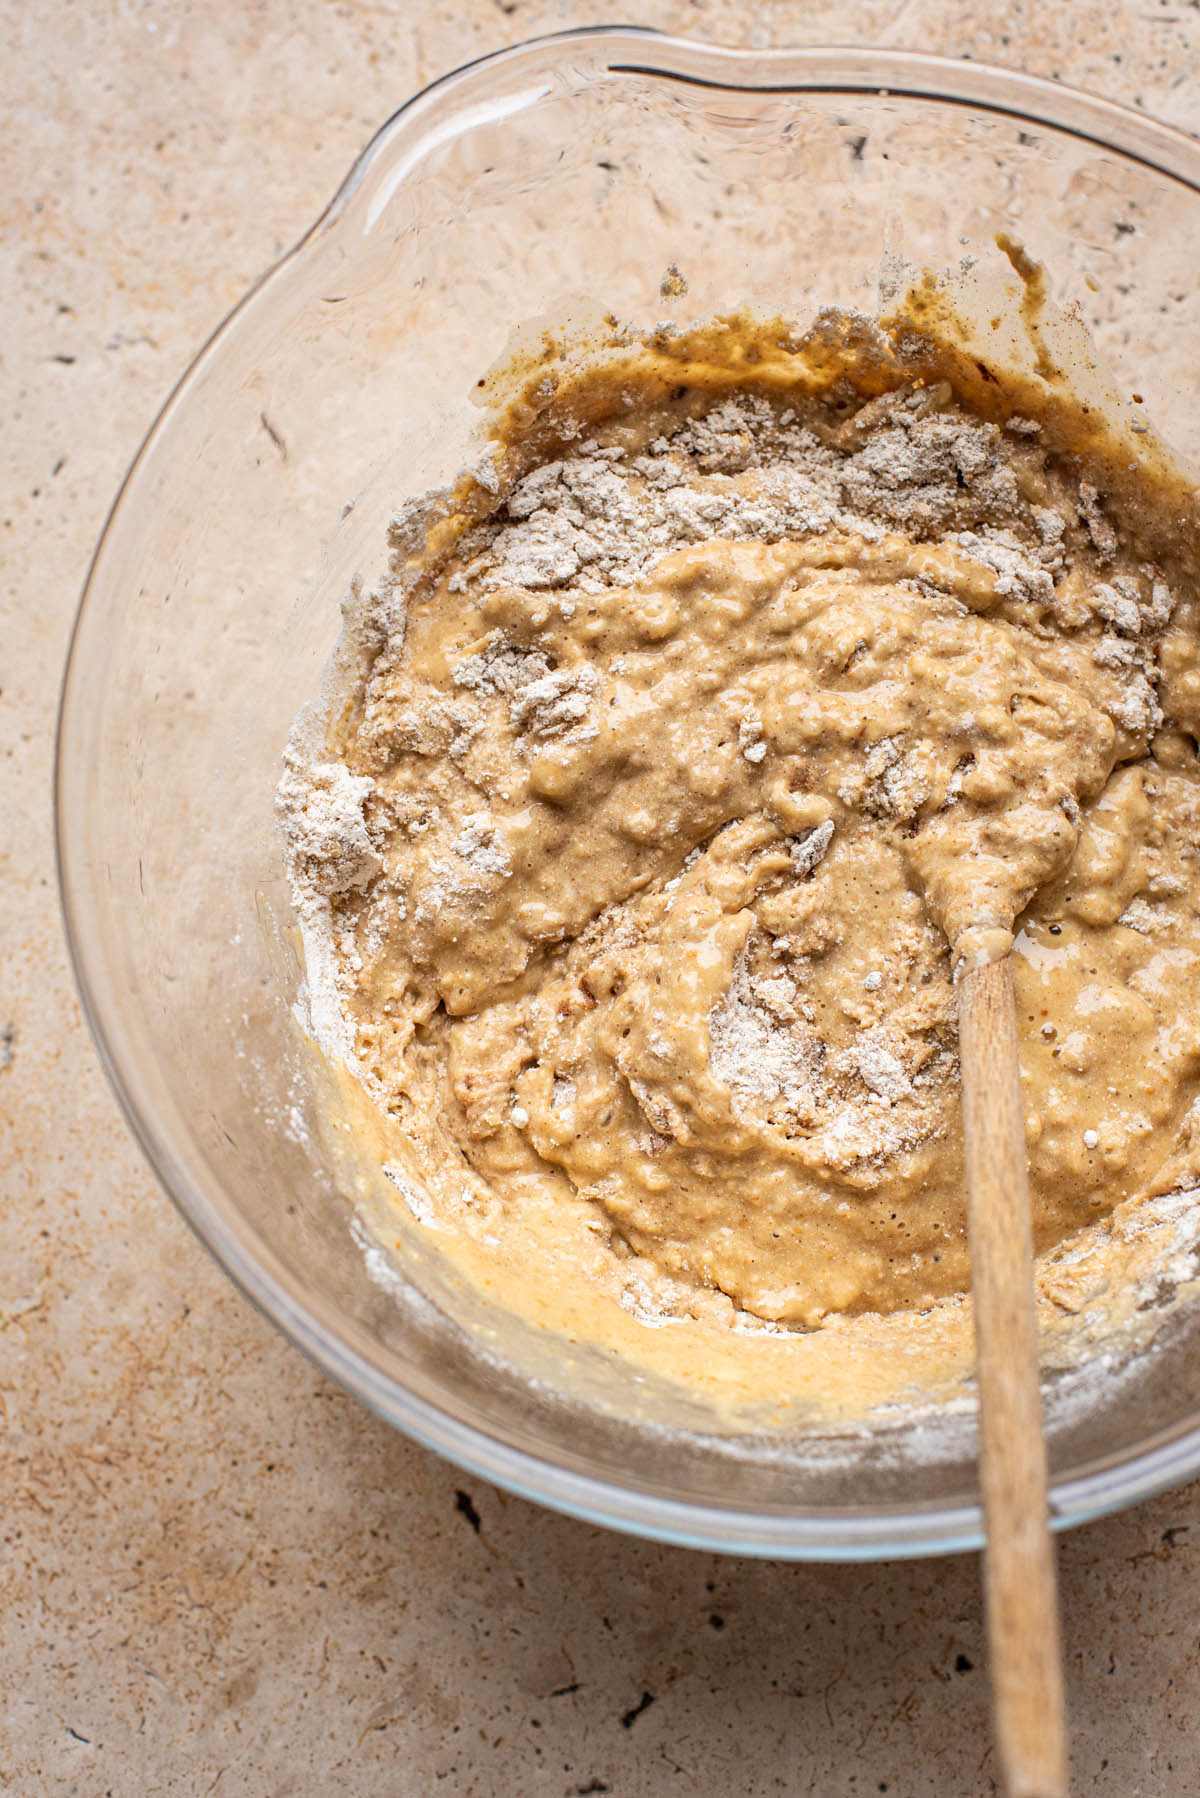 Gluten free banana bread batter partly mixed in a large bowl.